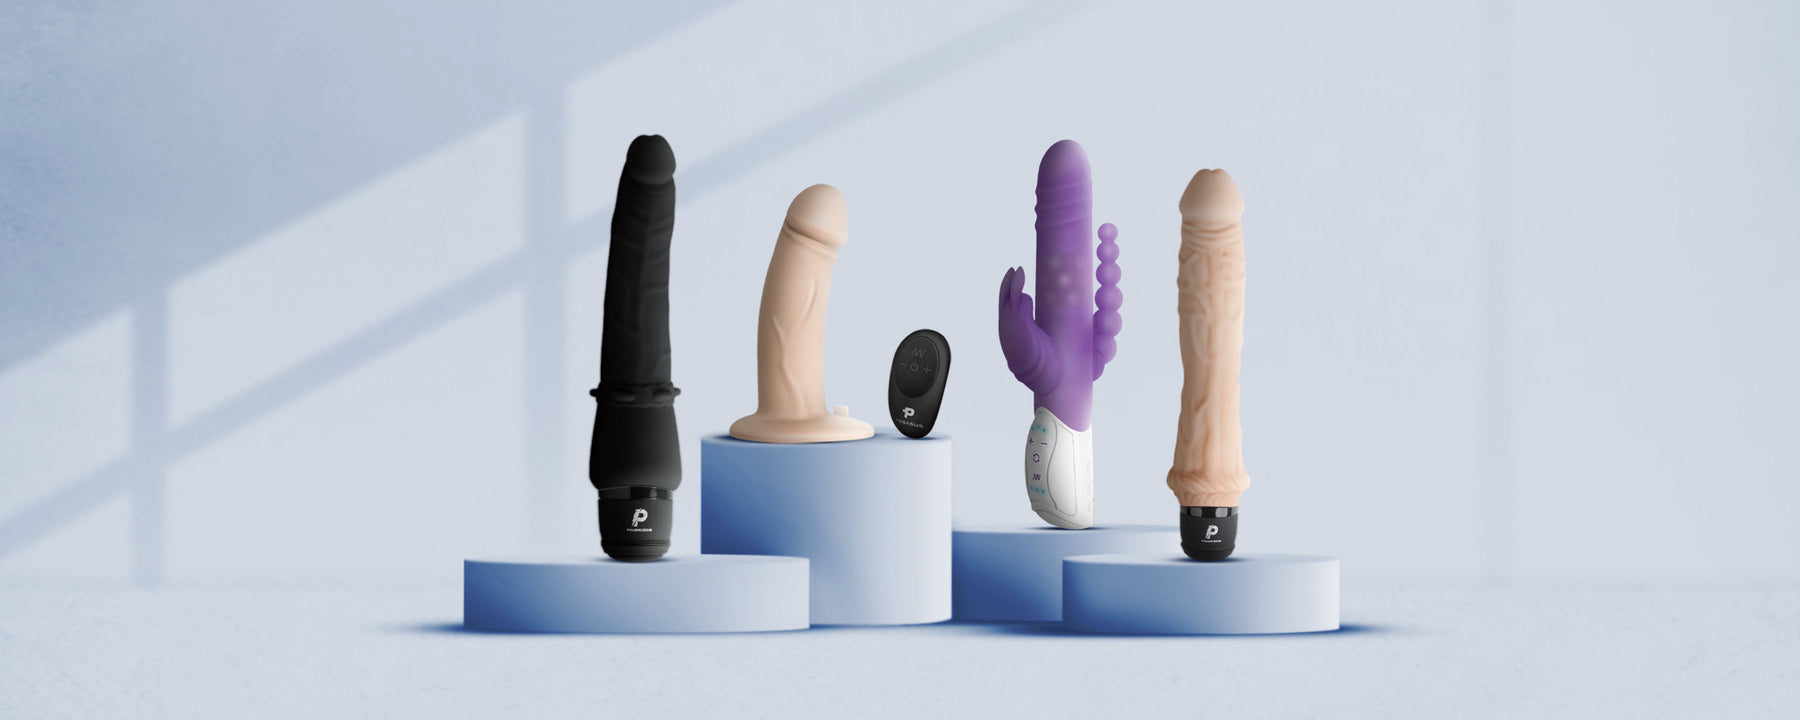 I Wanna Feeling So Real: Guide to Realistic Vibrators - Lux Fetish